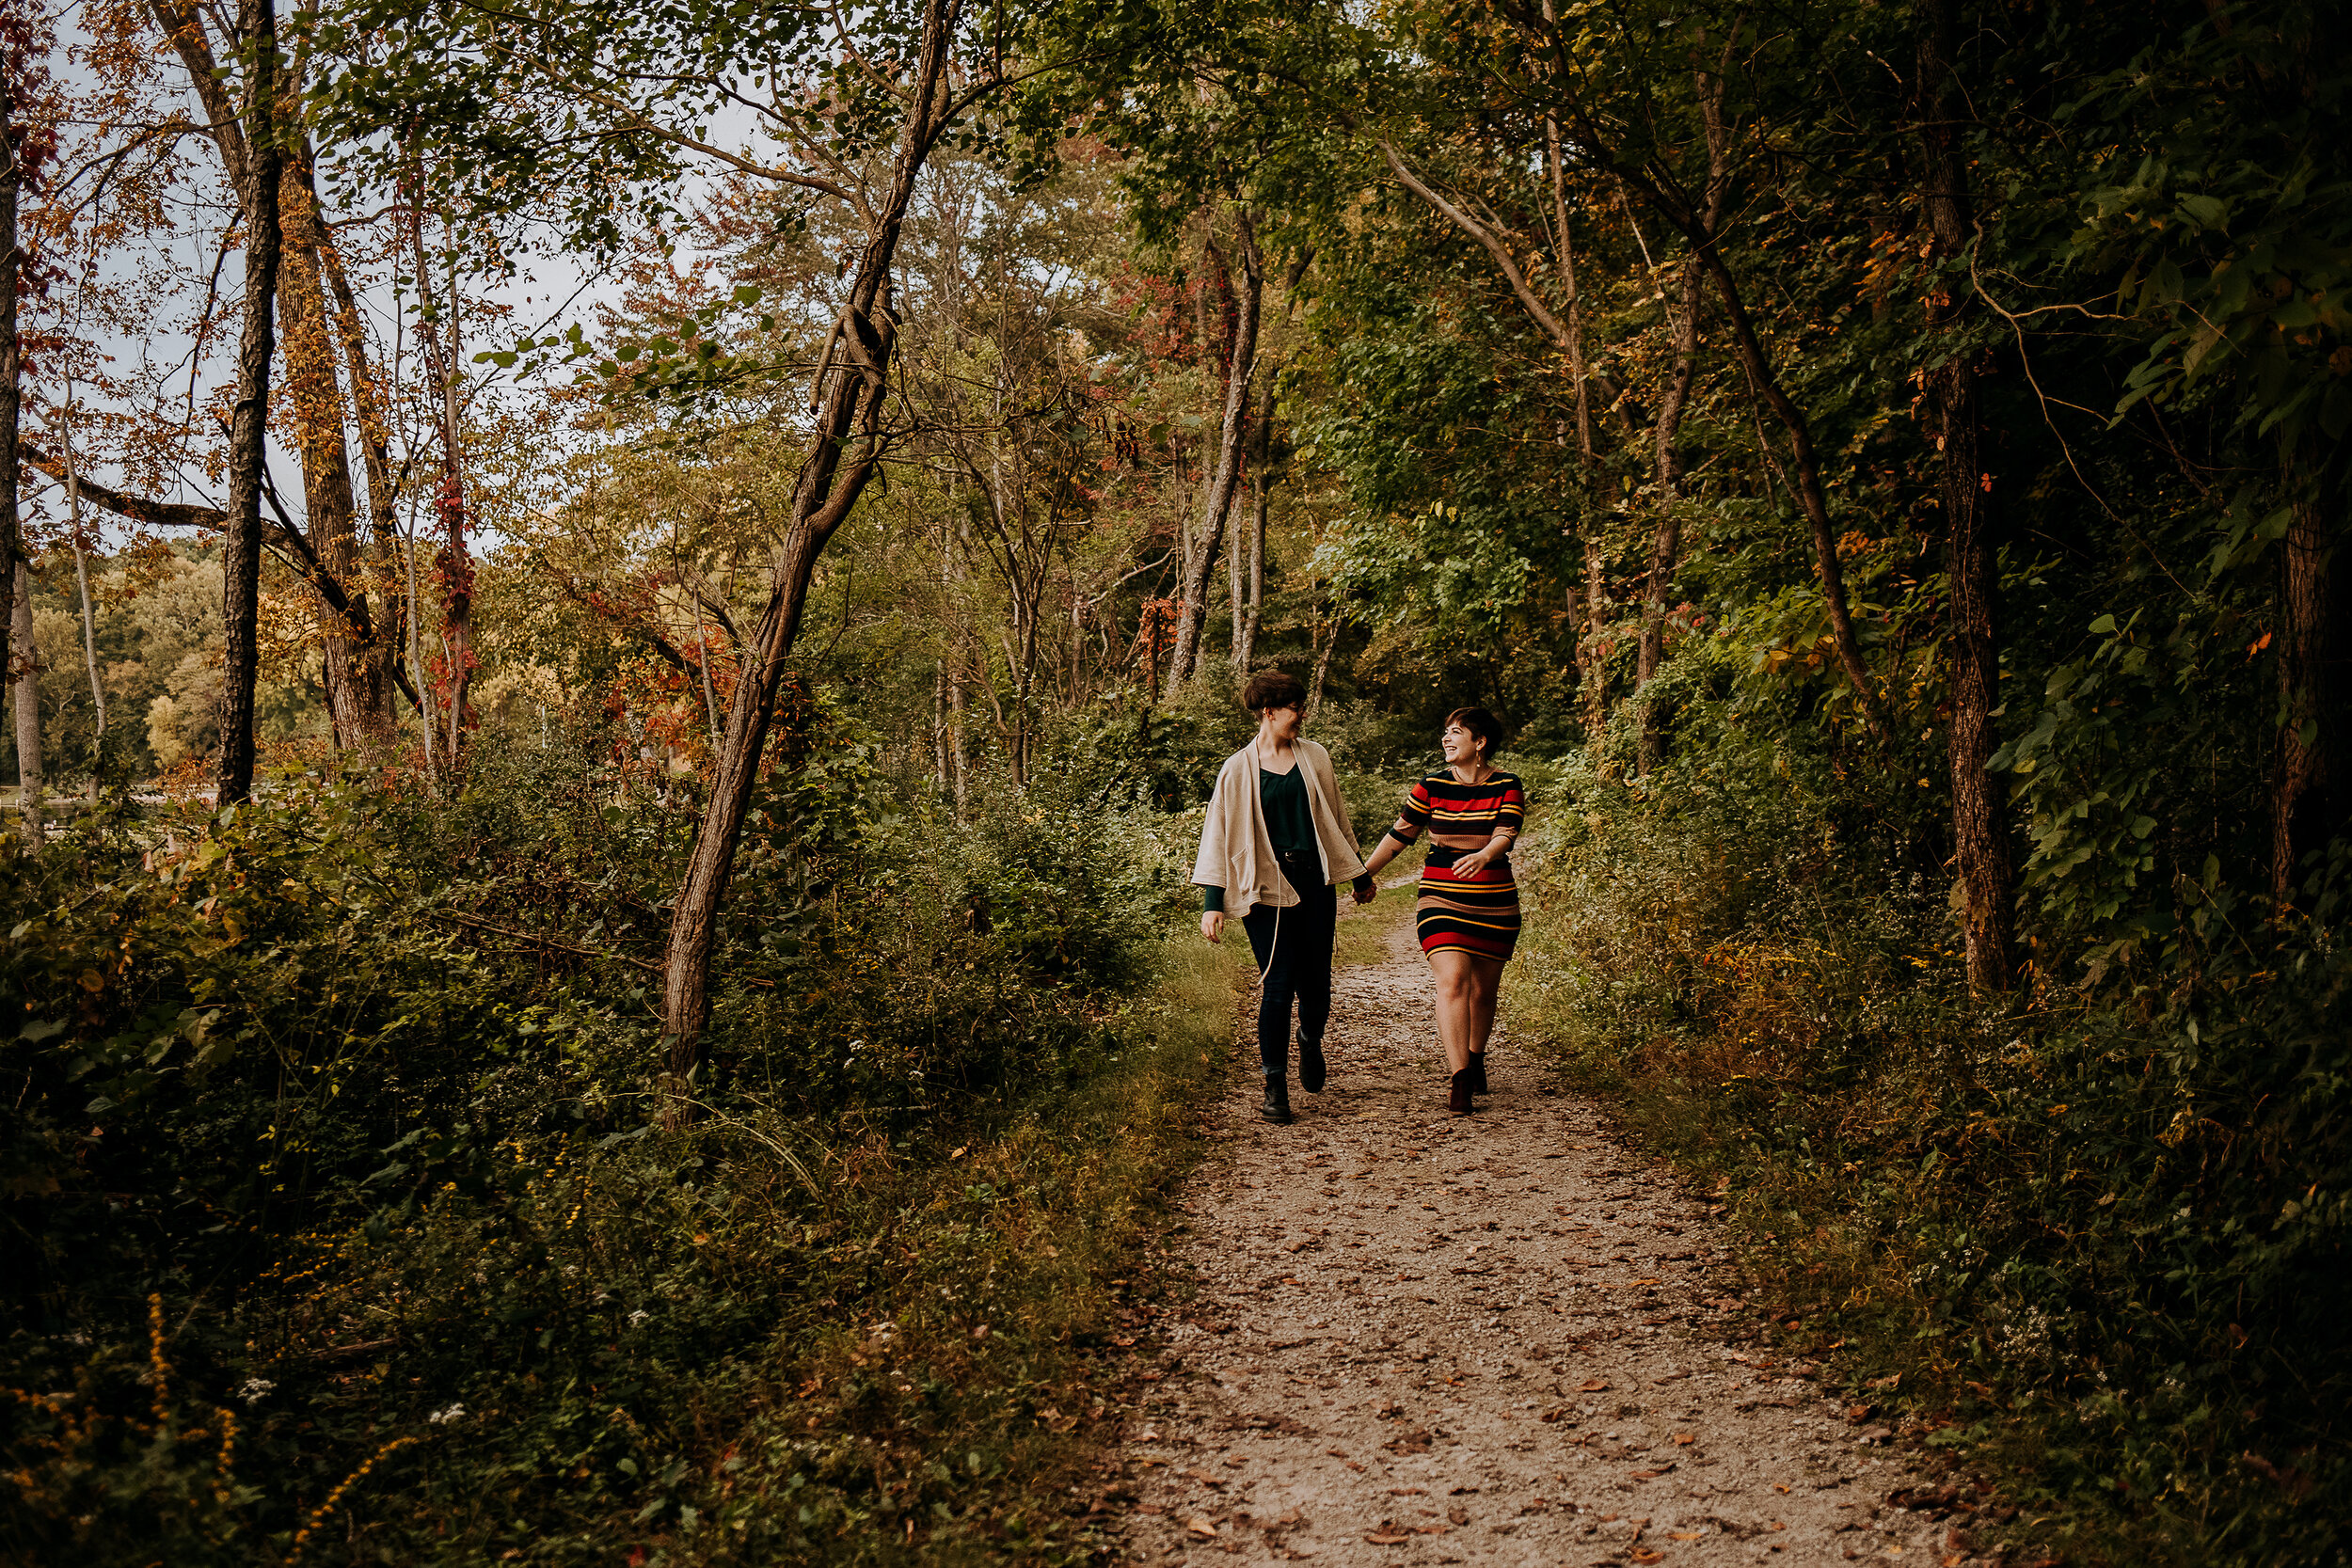  Candid shot of same-sex couple holding hands and walking on an outdoor trail with trees in a fall striped dress by Kindred + Co in Indiana. boho wedding photographer same-sex couple engagement photos pose inspo fall engagement photo outfit inspo dre